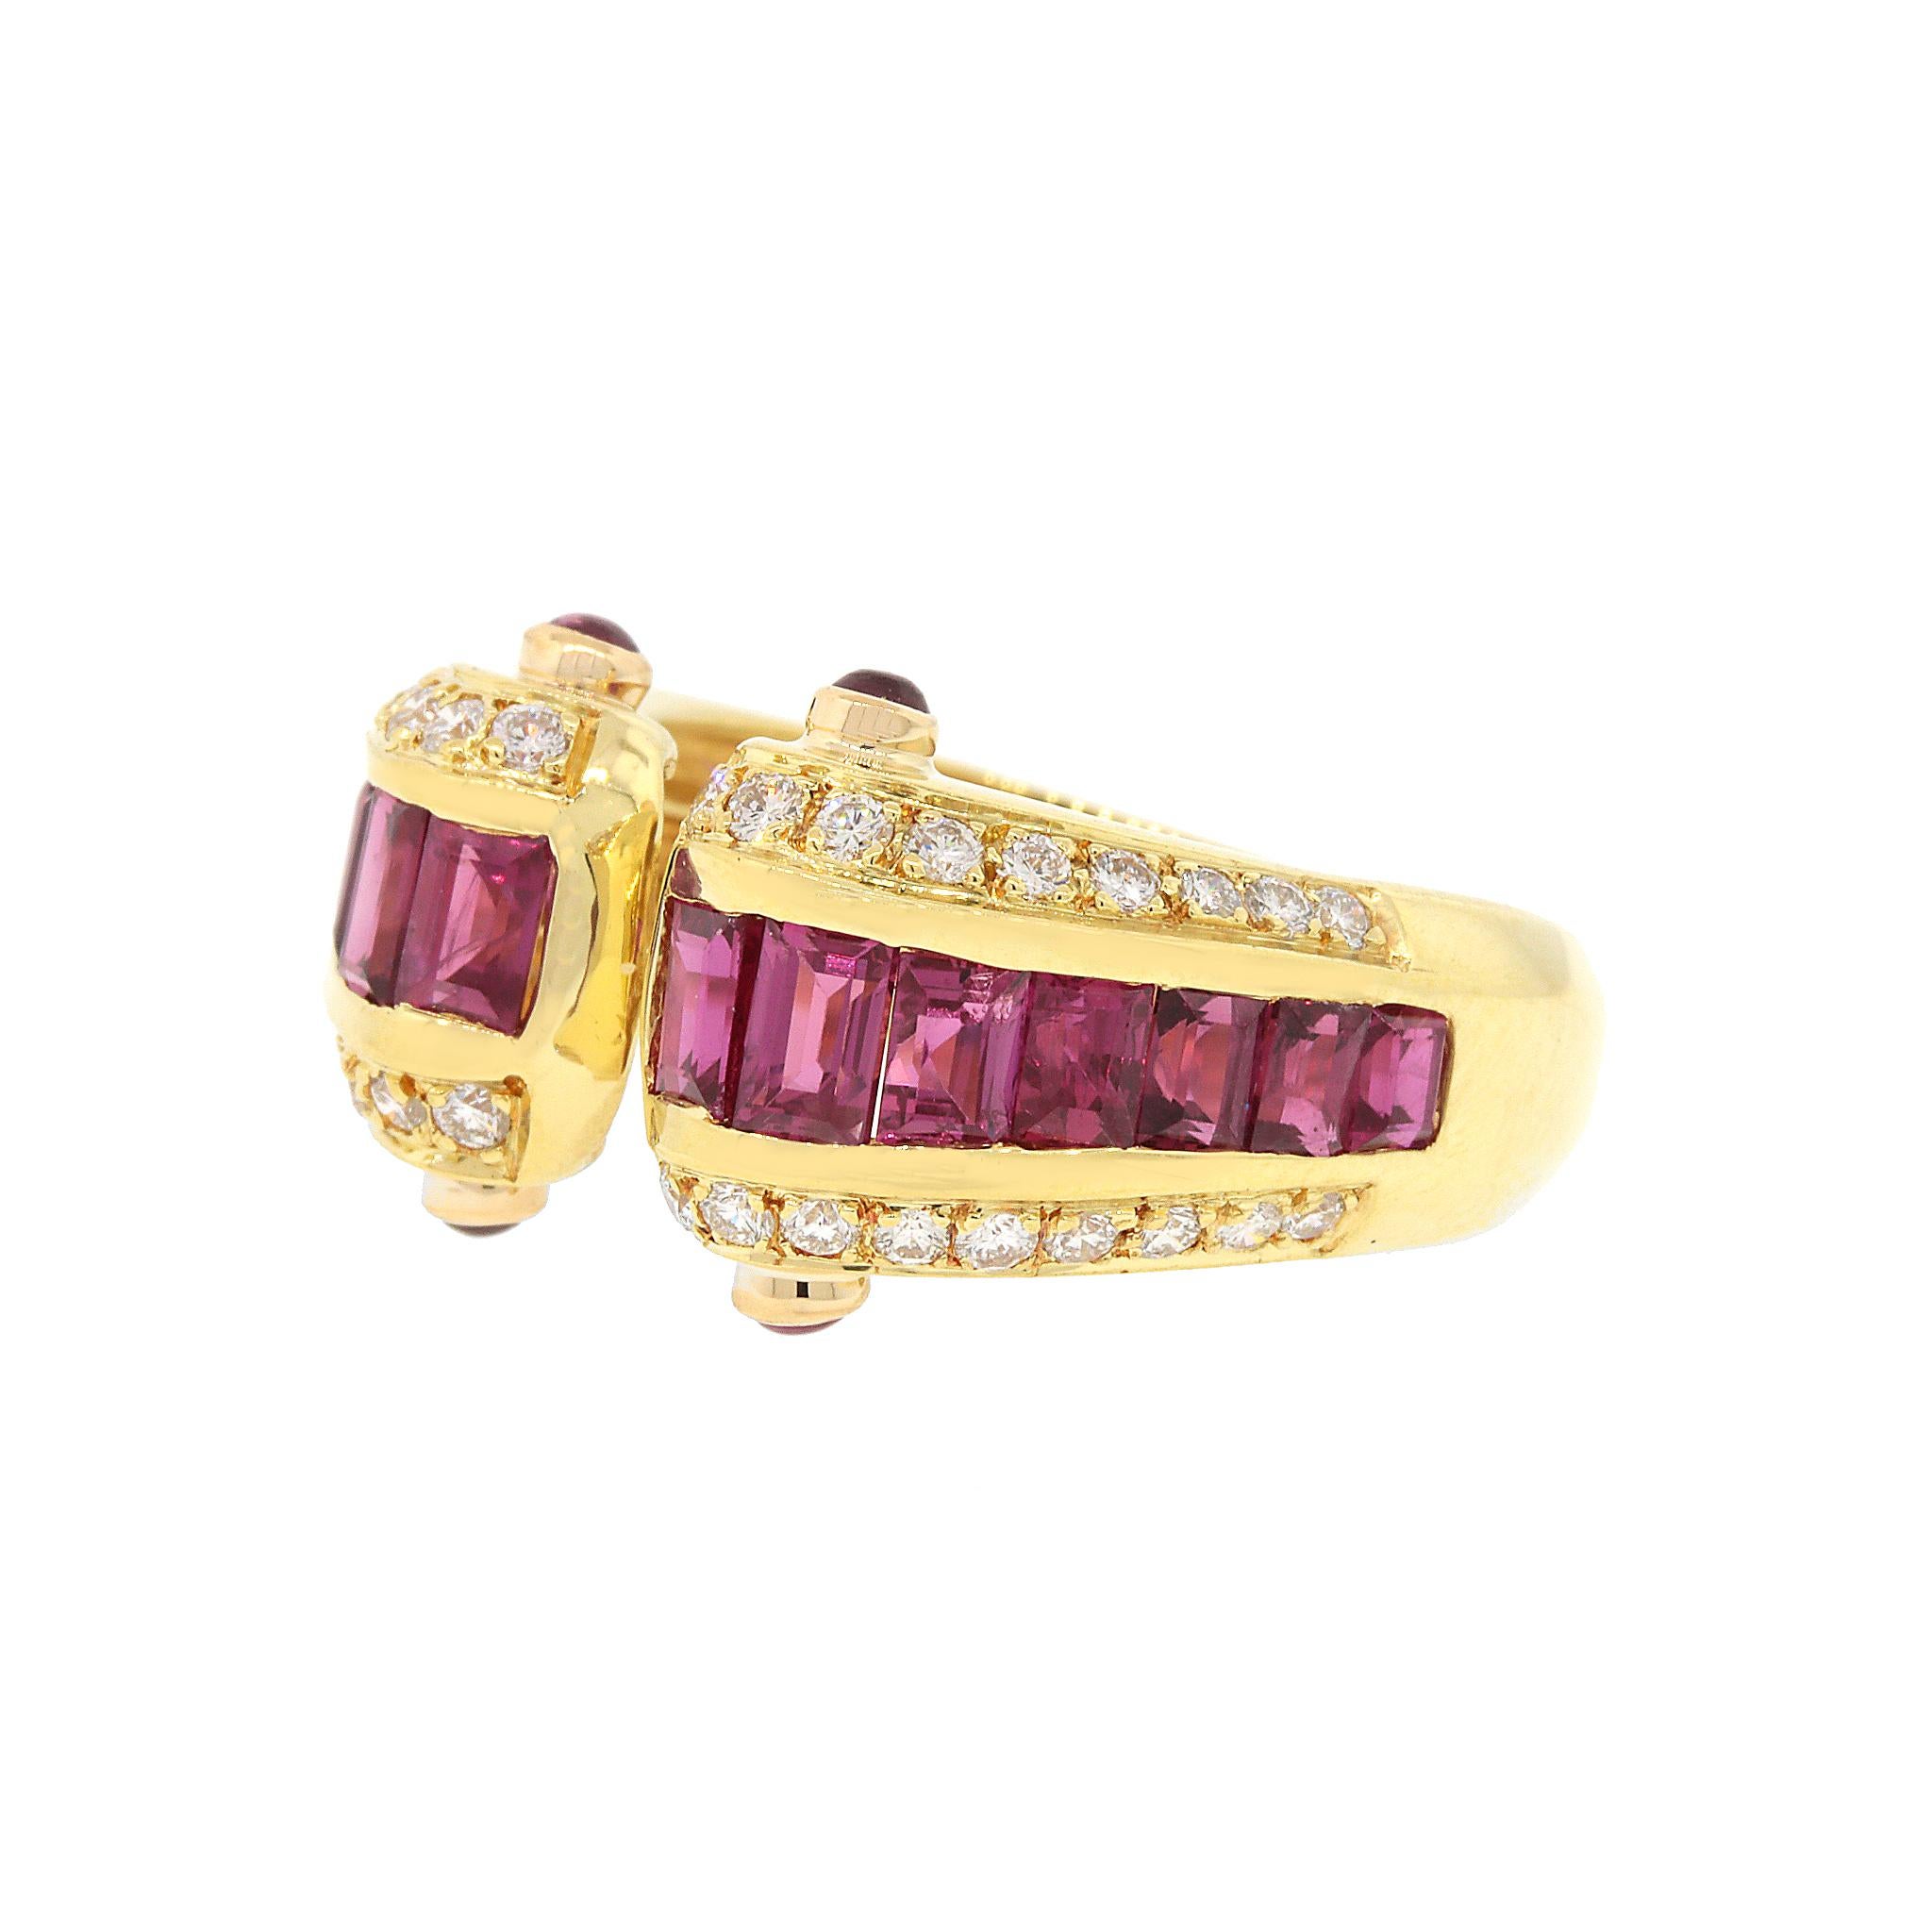 Rubies and diamonds are a match made in heaven and you can see the natural beauty of the combination perfectly in this stunning ring.  

18 kt Yellow Gold
Ruby: 1.50 tcw
Diamond: 0.30 ct twd
Ring Size: 6.5
Total Weight: 7.2 grams